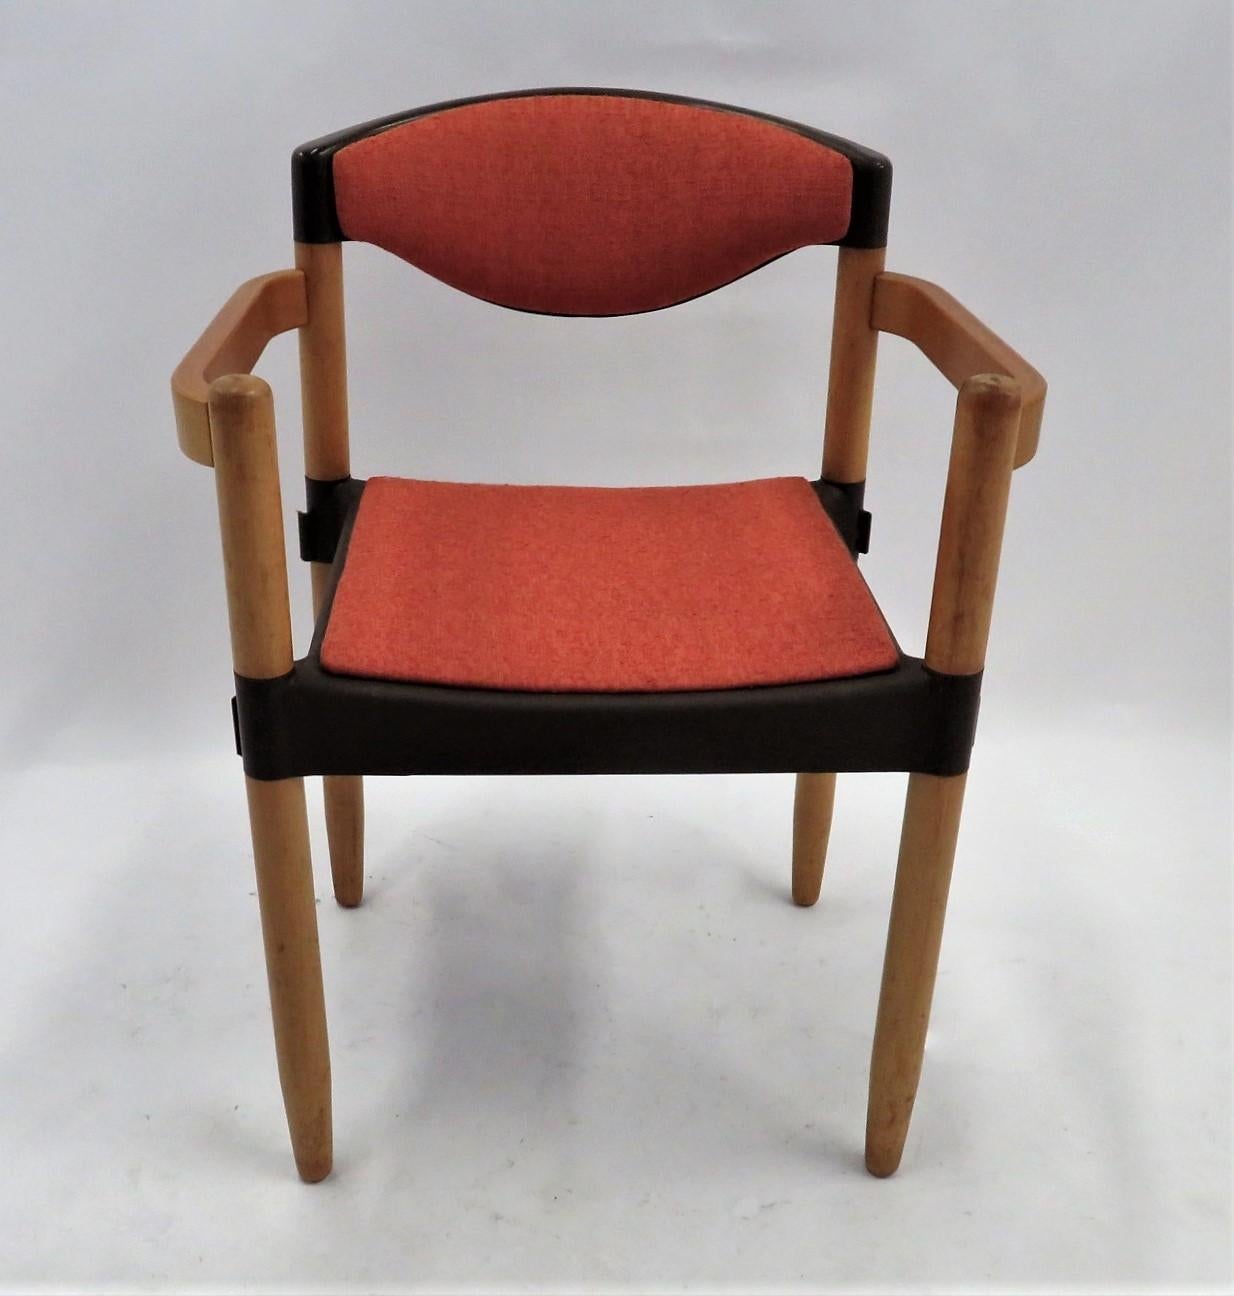 Fabric 6 Strax Dining Chairs by Casala / Germany 1970s by Harmut Lohmeyer